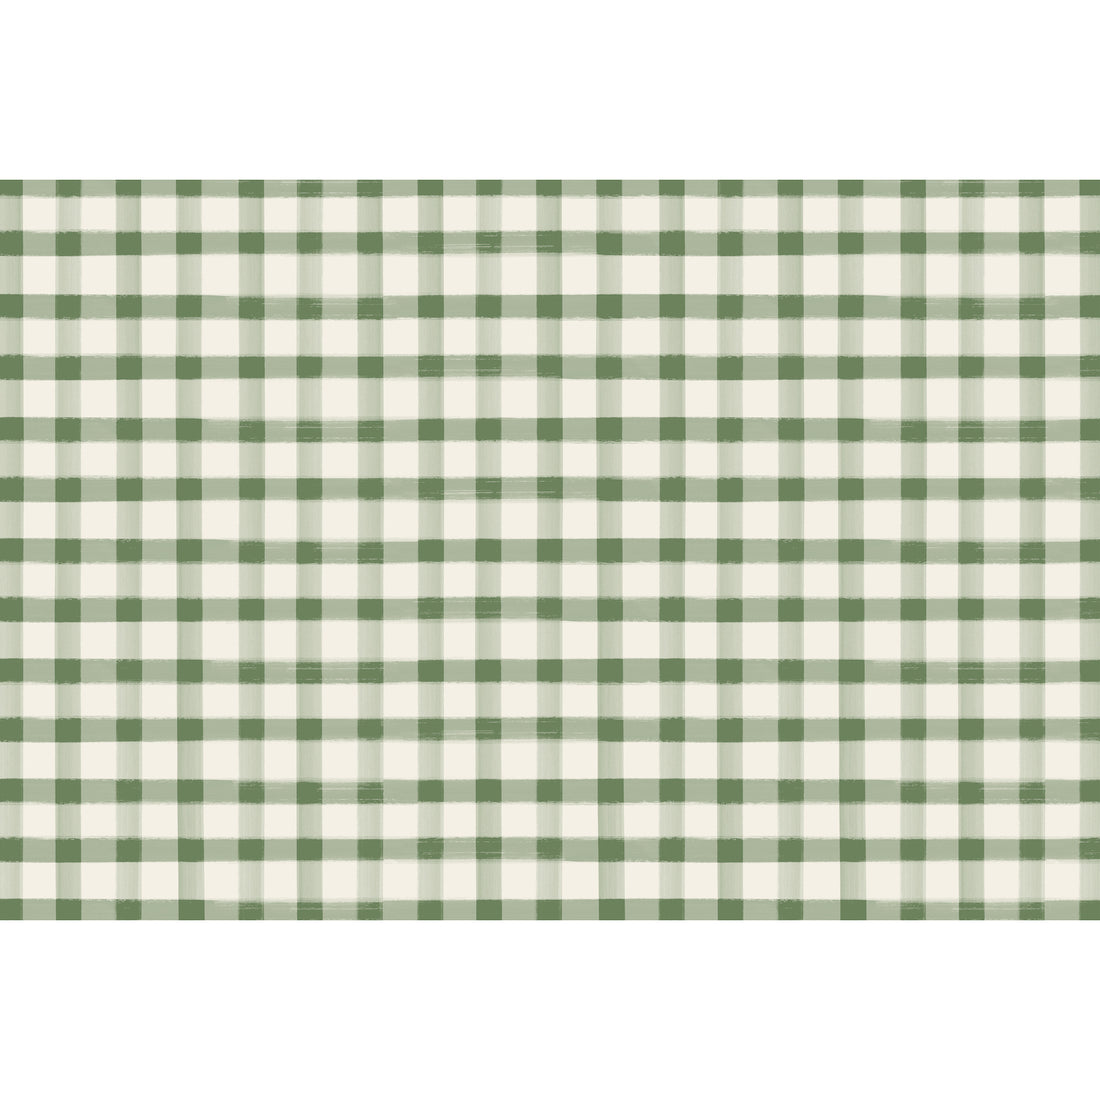 Paper placemat printed with dark green painted check